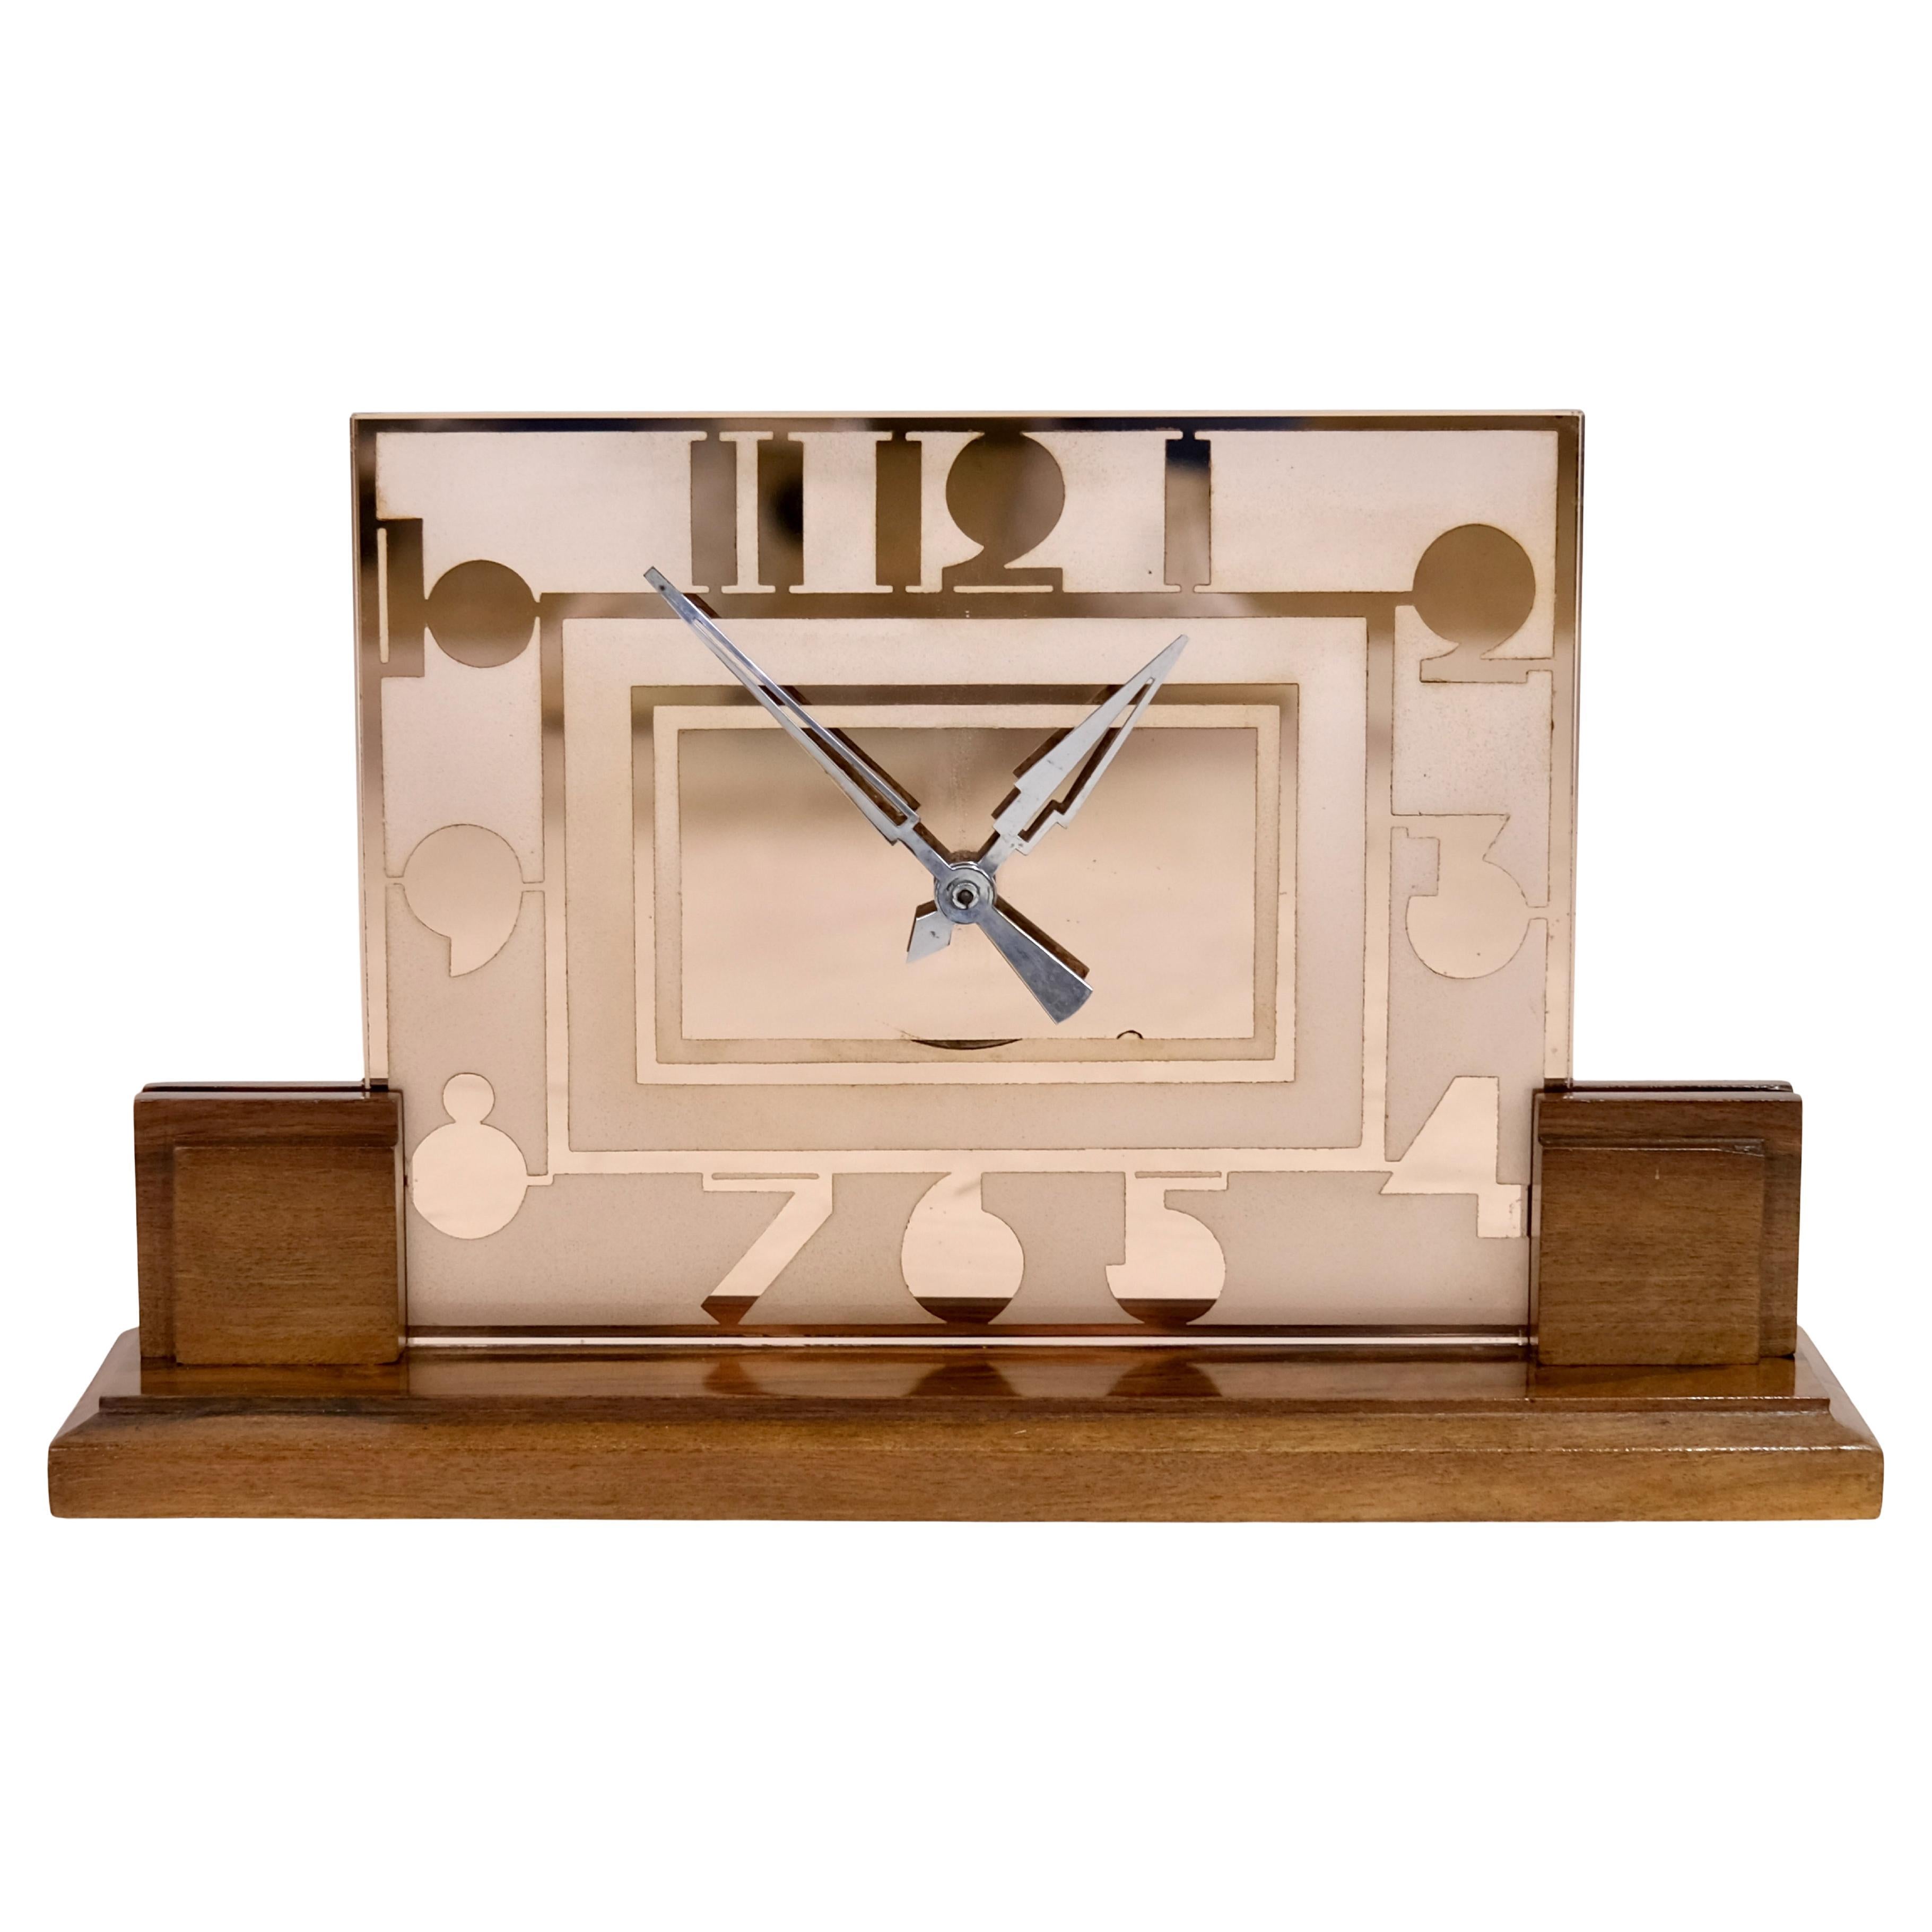 1930s Art Deco Table Clock With Rosaline Glass And Art Deco Typical Numerals